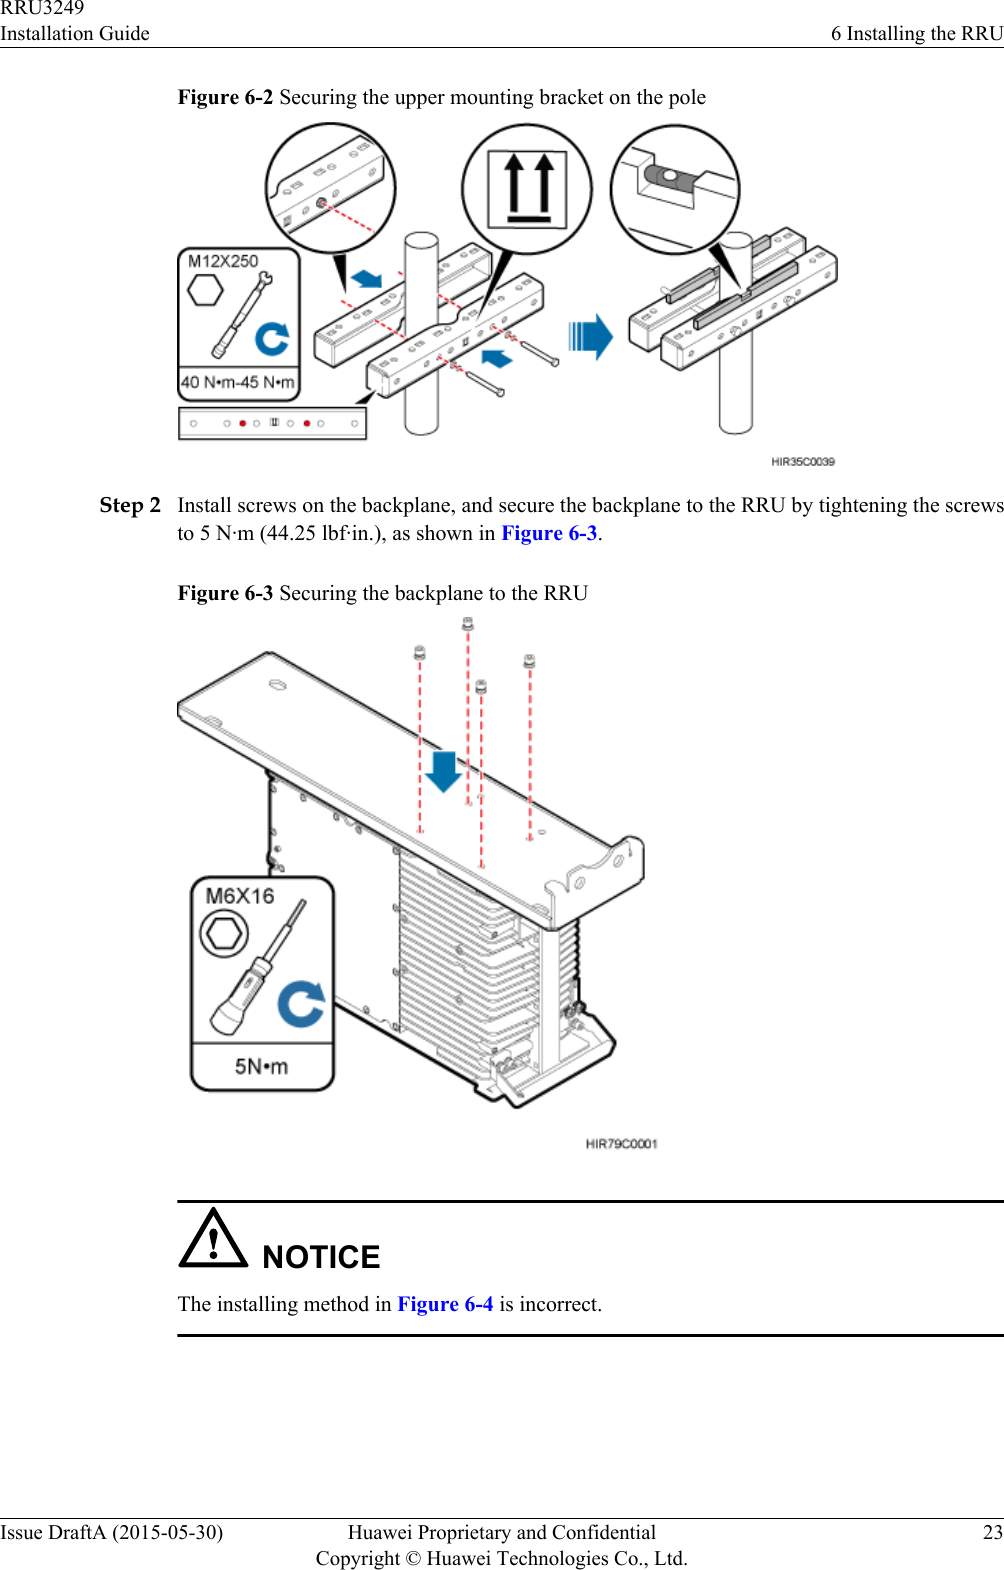 Figure 6-2 Securing the upper mounting bracket on the poleStep 2 Install screws on the backplane, and secure the backplane to the RRU by tightening the screwsto 5 N·m (44.25 lbf·in.), as shown in Figure 6-3.Figure 6-3 Securing the backplane to the RRUNOTICEThe installing method in Figure 6-4 is incorrect.RRU3249Installation Guide 6 Installing the RRUIssue DraftA (2015-05-30) Huawei Proprietary and ConfidentialCopyright © Huawei Technologies Co., Ltd.23